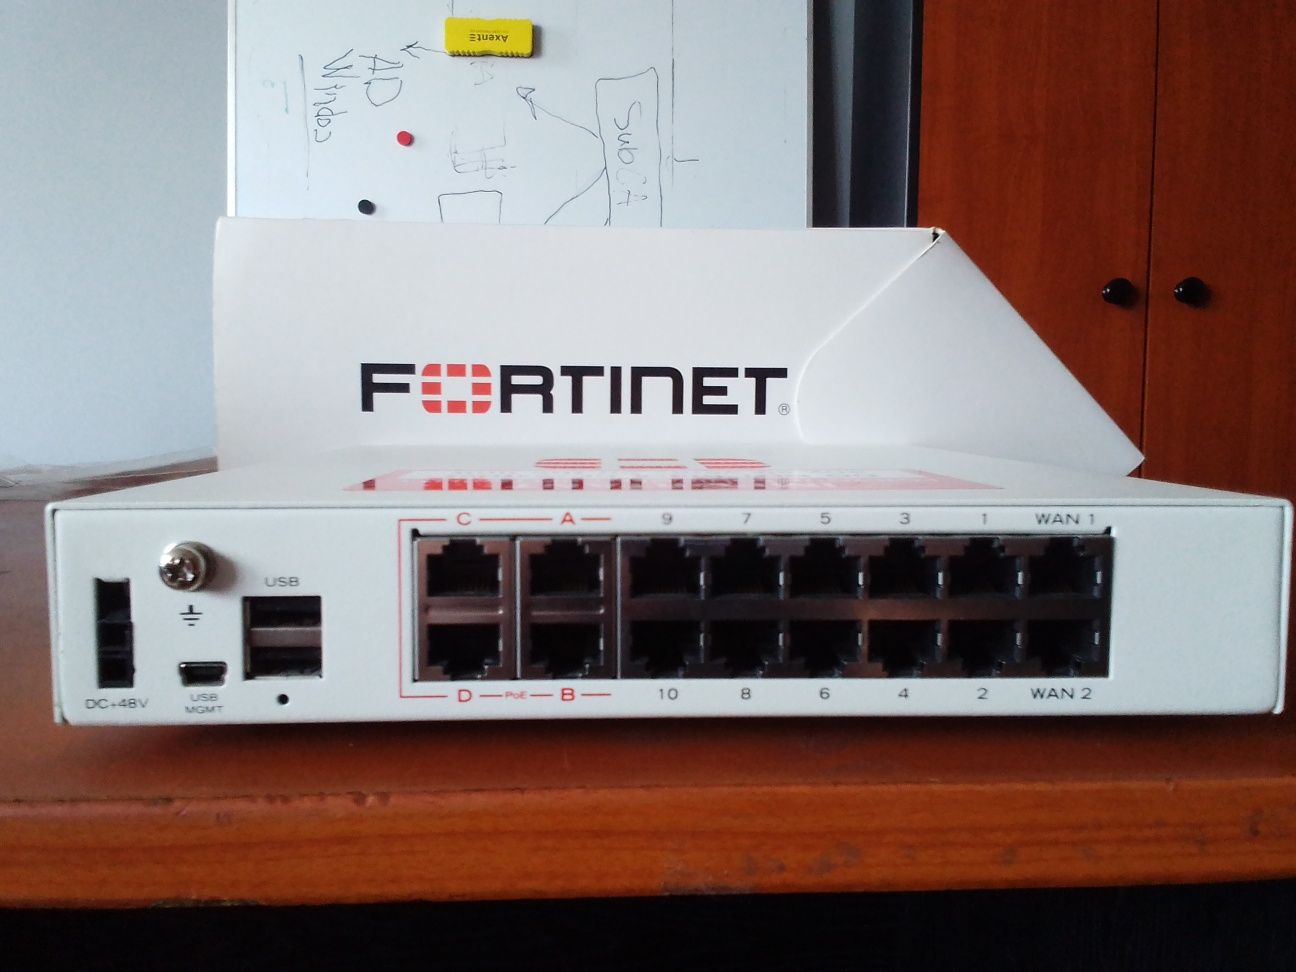 Fortinet Fortigate FortiWiFi 90D PoE